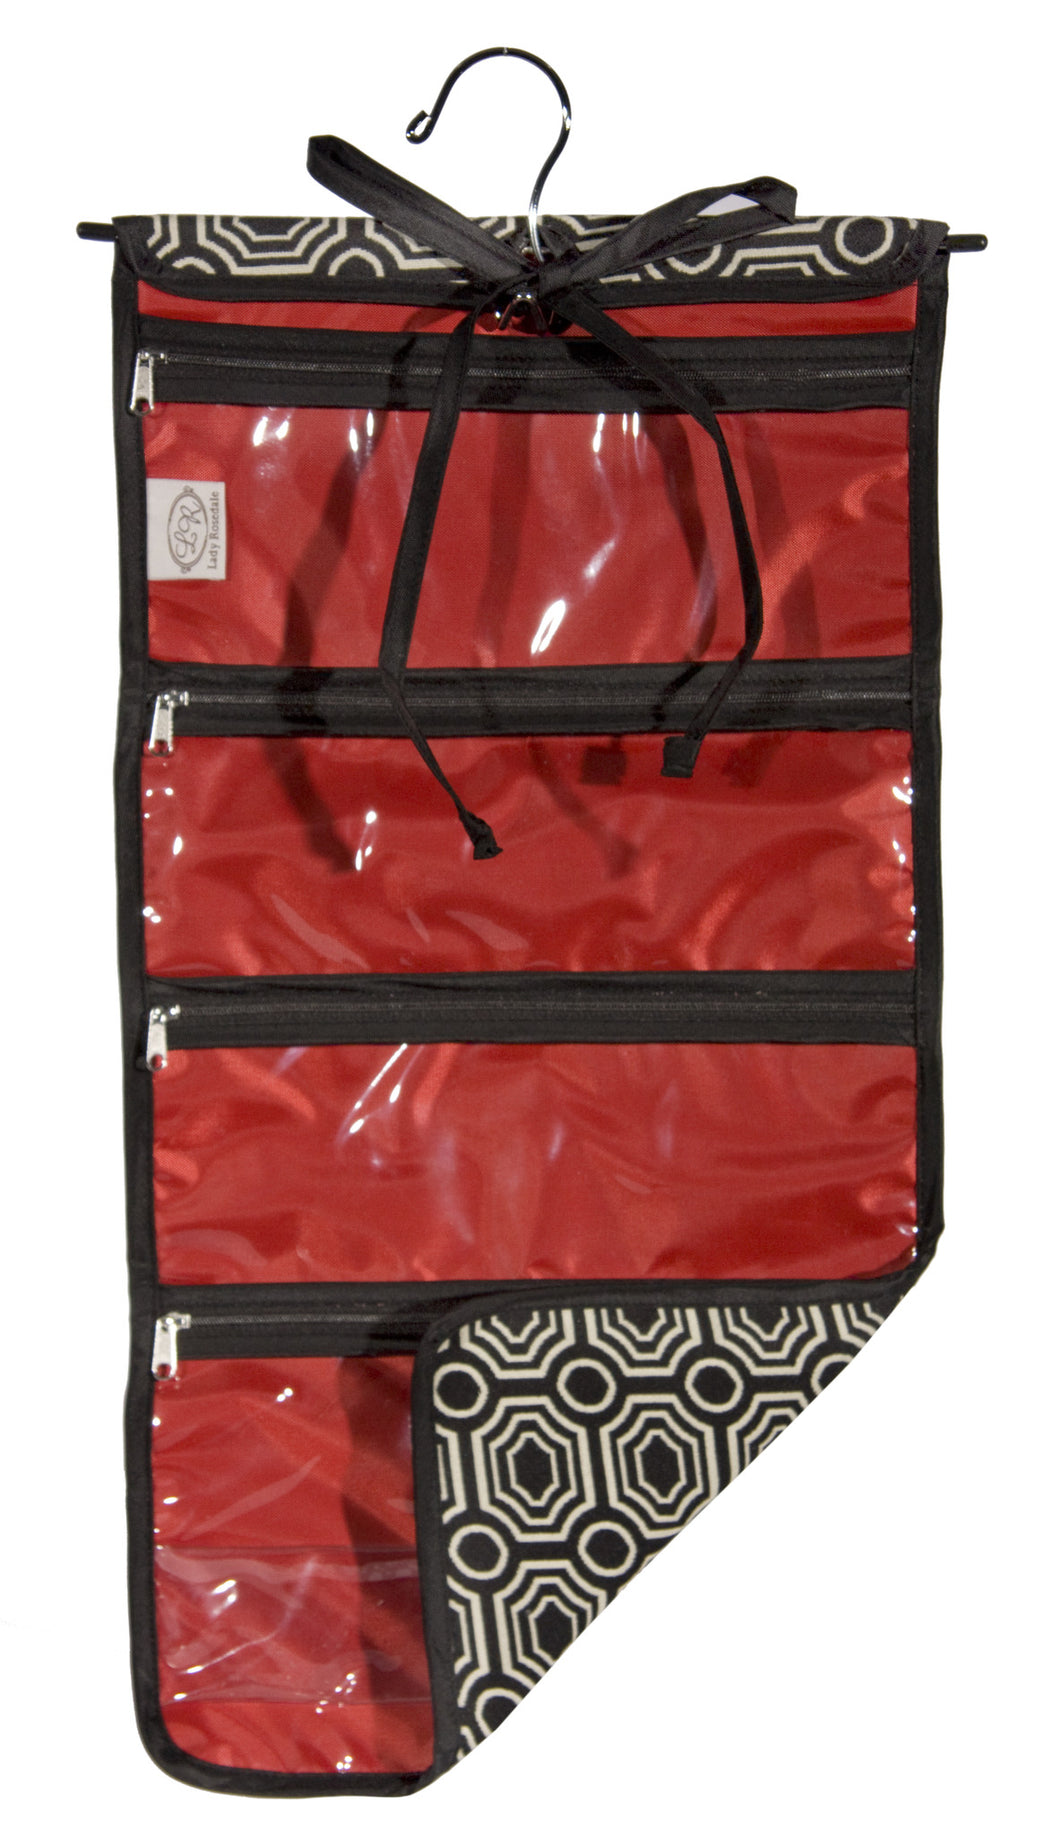 L153-1423 Hanging Cosmetic Bradstreet Ebony, Comes with Metal Hanger, multiple Zippered Pockets, bottom expandable Pocket, Rolls and ties for easy travelling and to keep everything contained. Part of the Cosmetic and Travel Collection 12